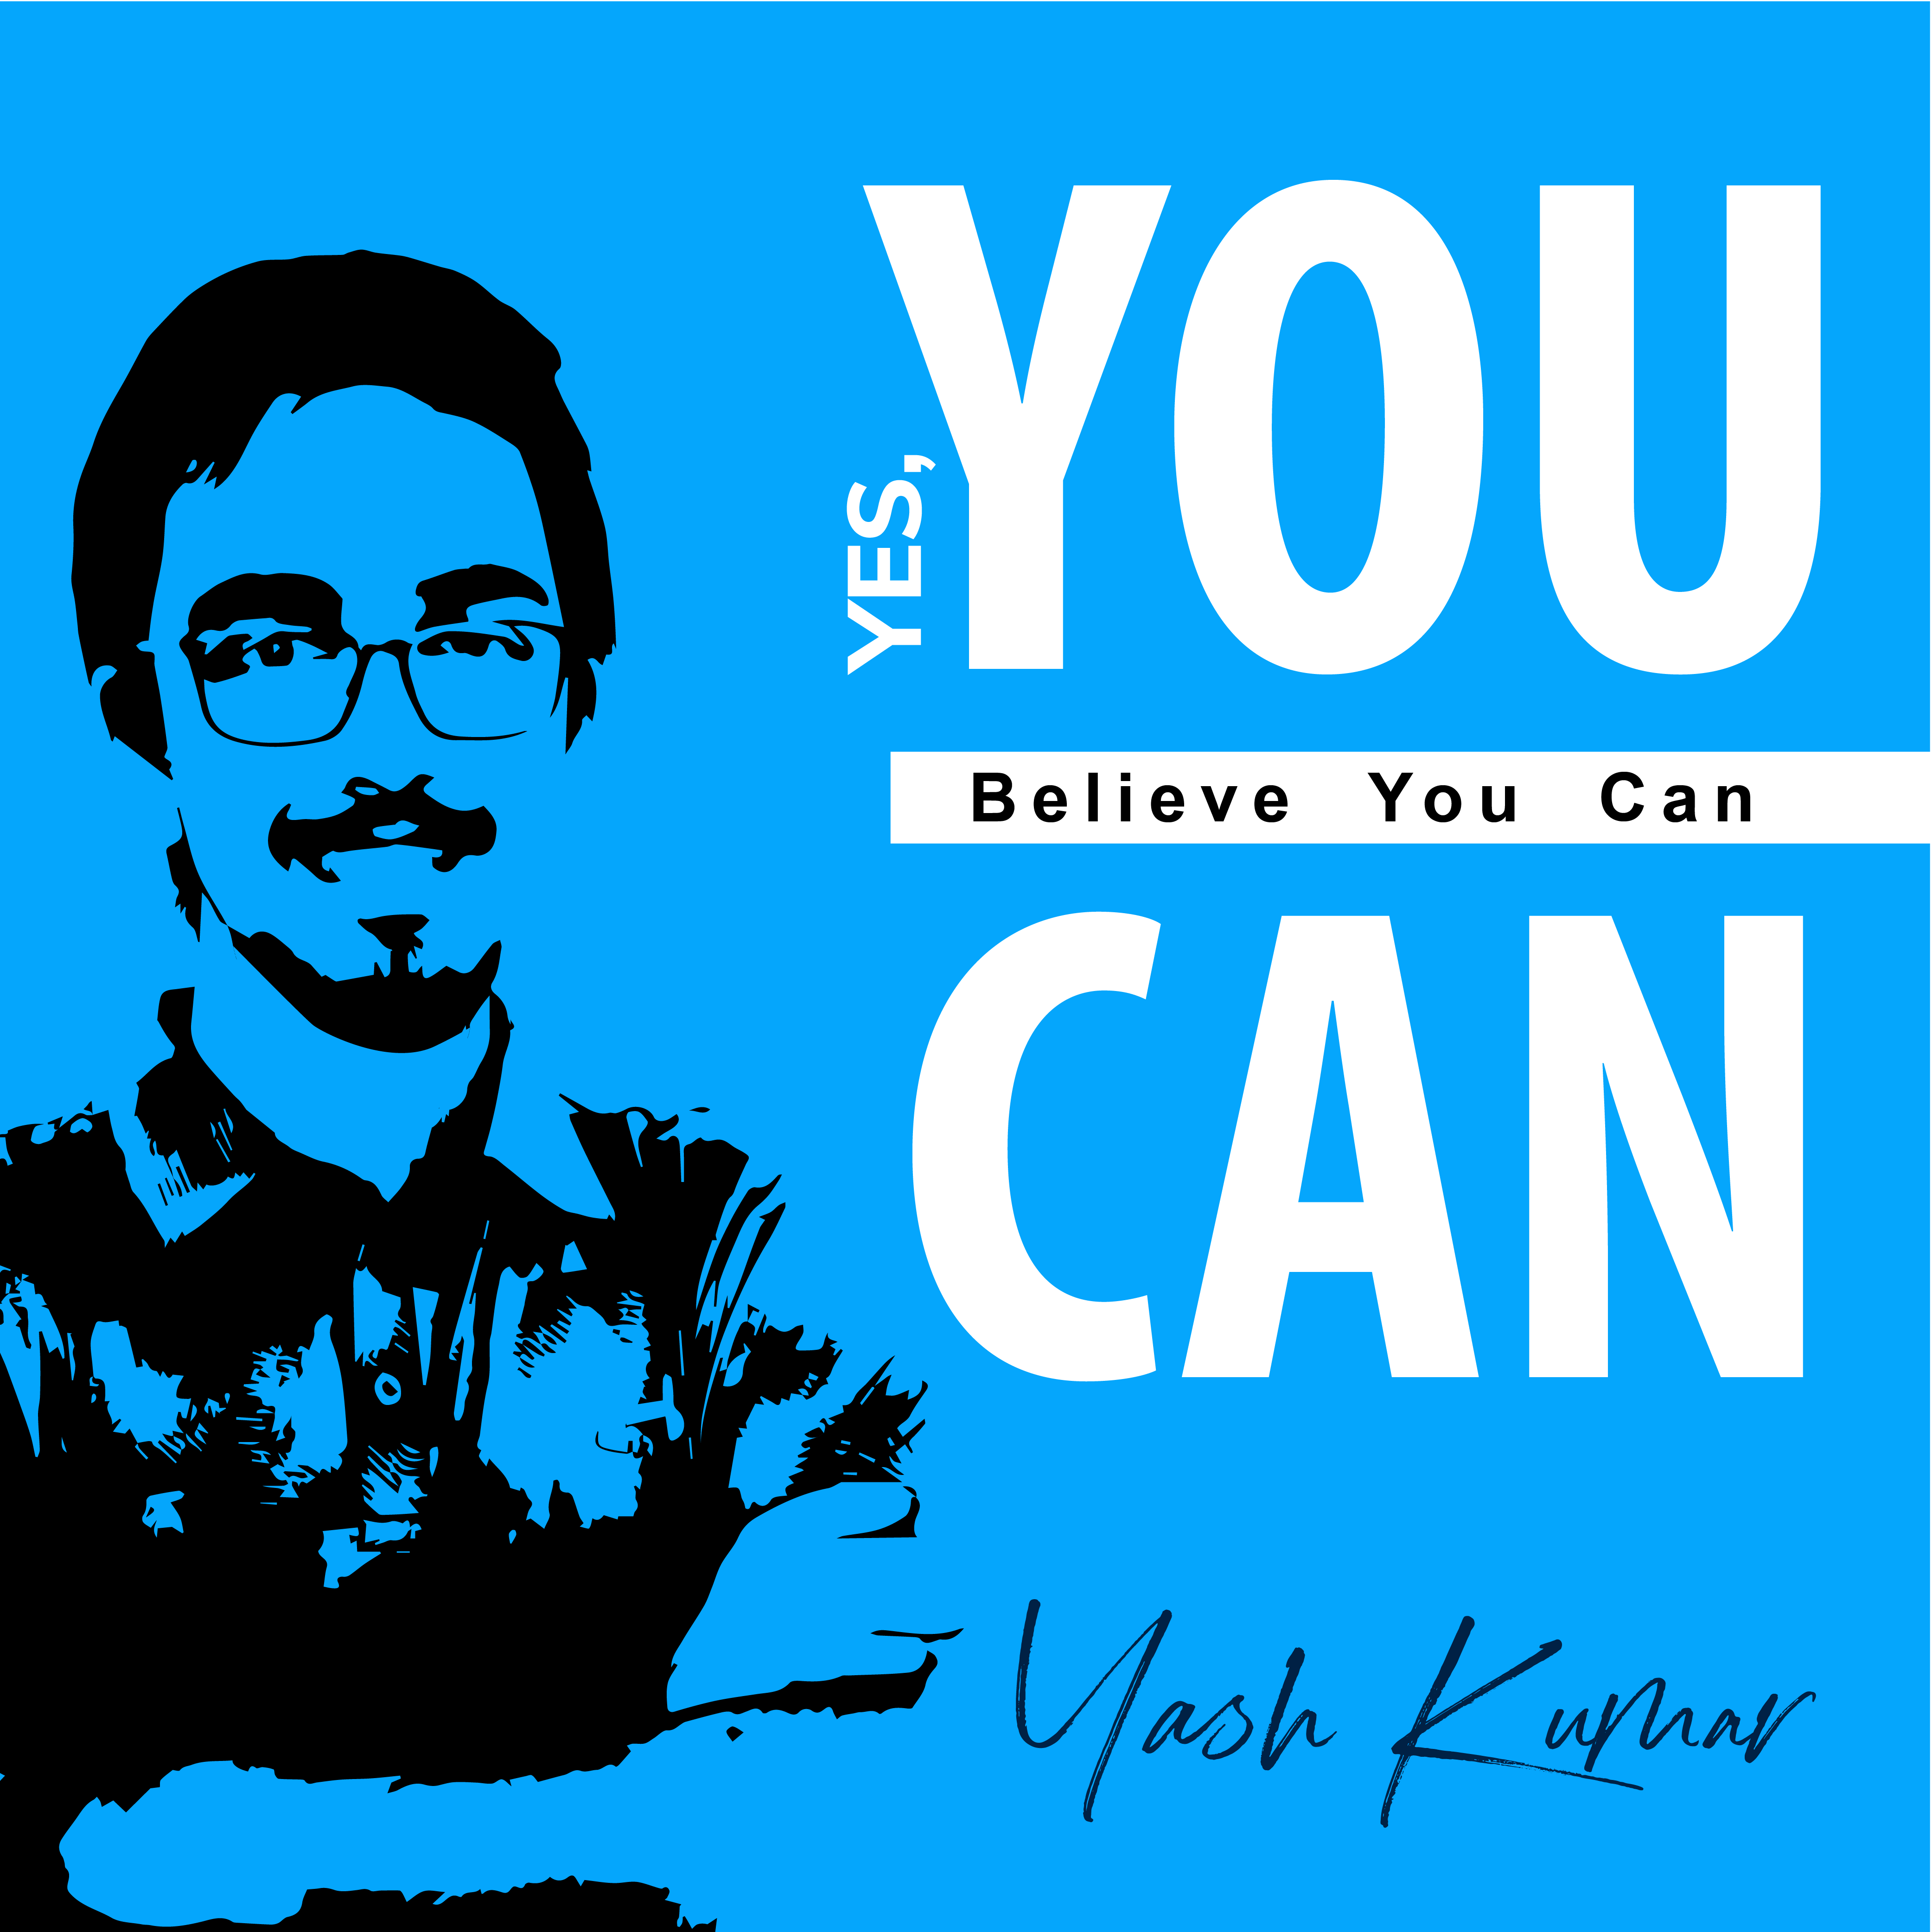 Yes, You Can: Believe You Can.